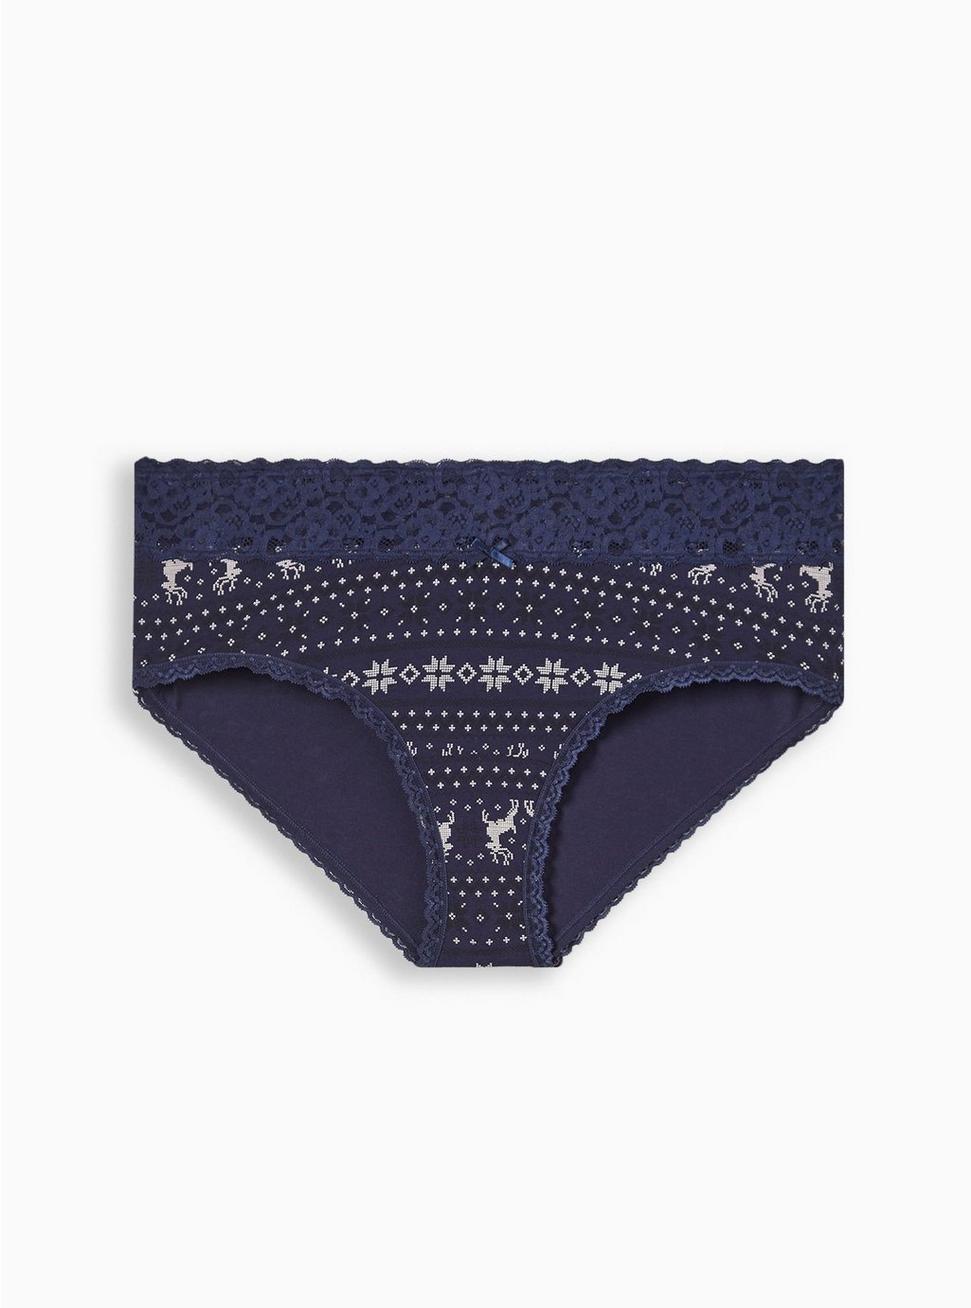 Cotton Mid-Rise Cheeky Lace Trim Panty, FROSTY FAIR ISLE NAVY, hi-res